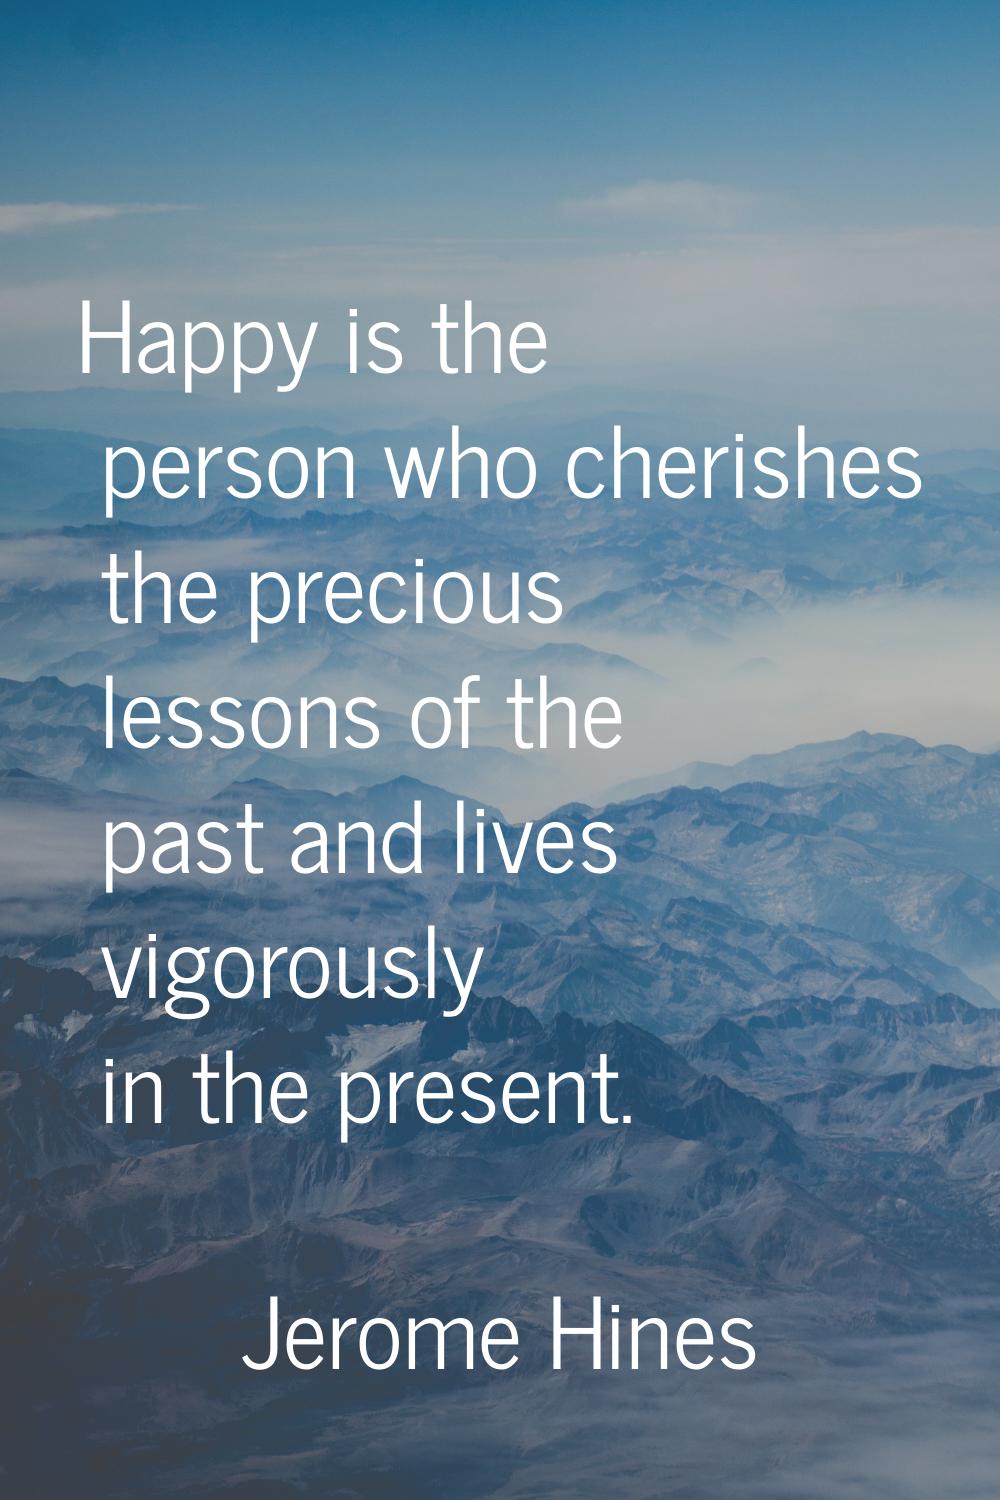 Happy is the person who cherishes the precious lessons of the past and lives vigorously in the pres